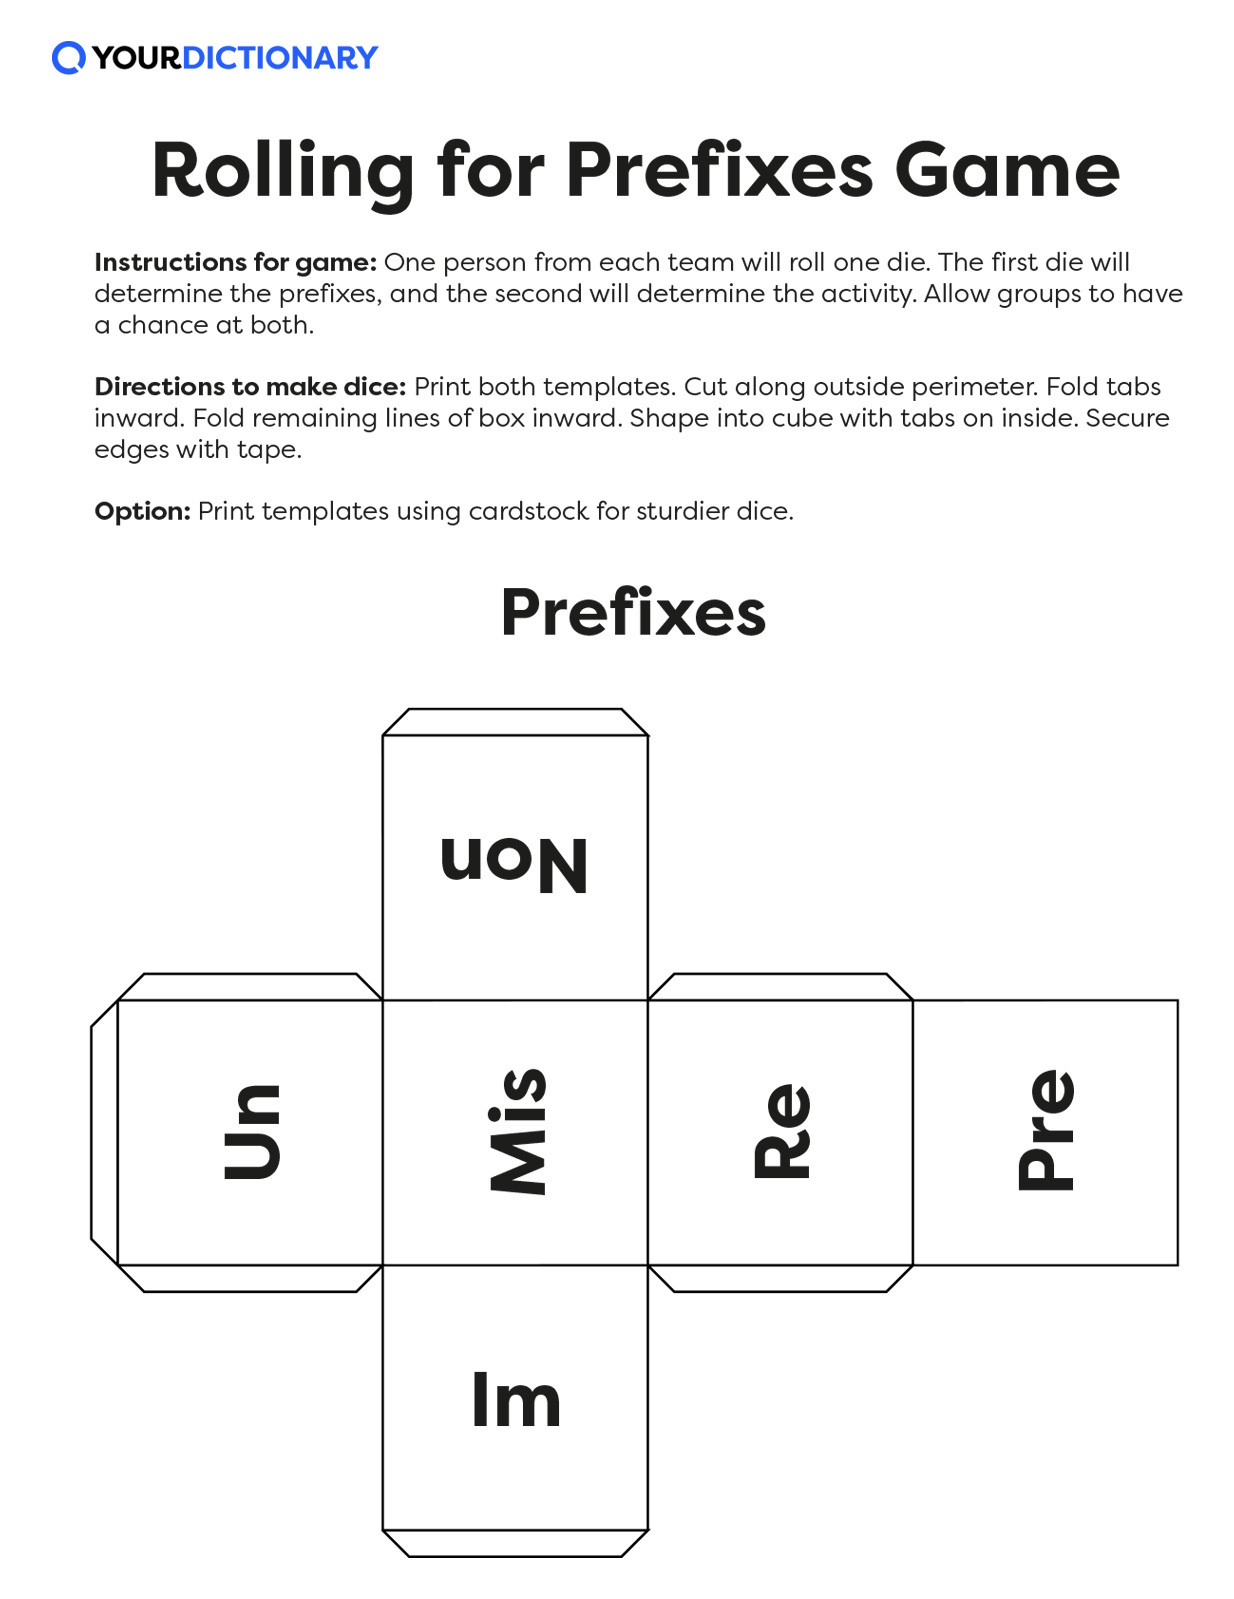 rolling for prefixes dice game